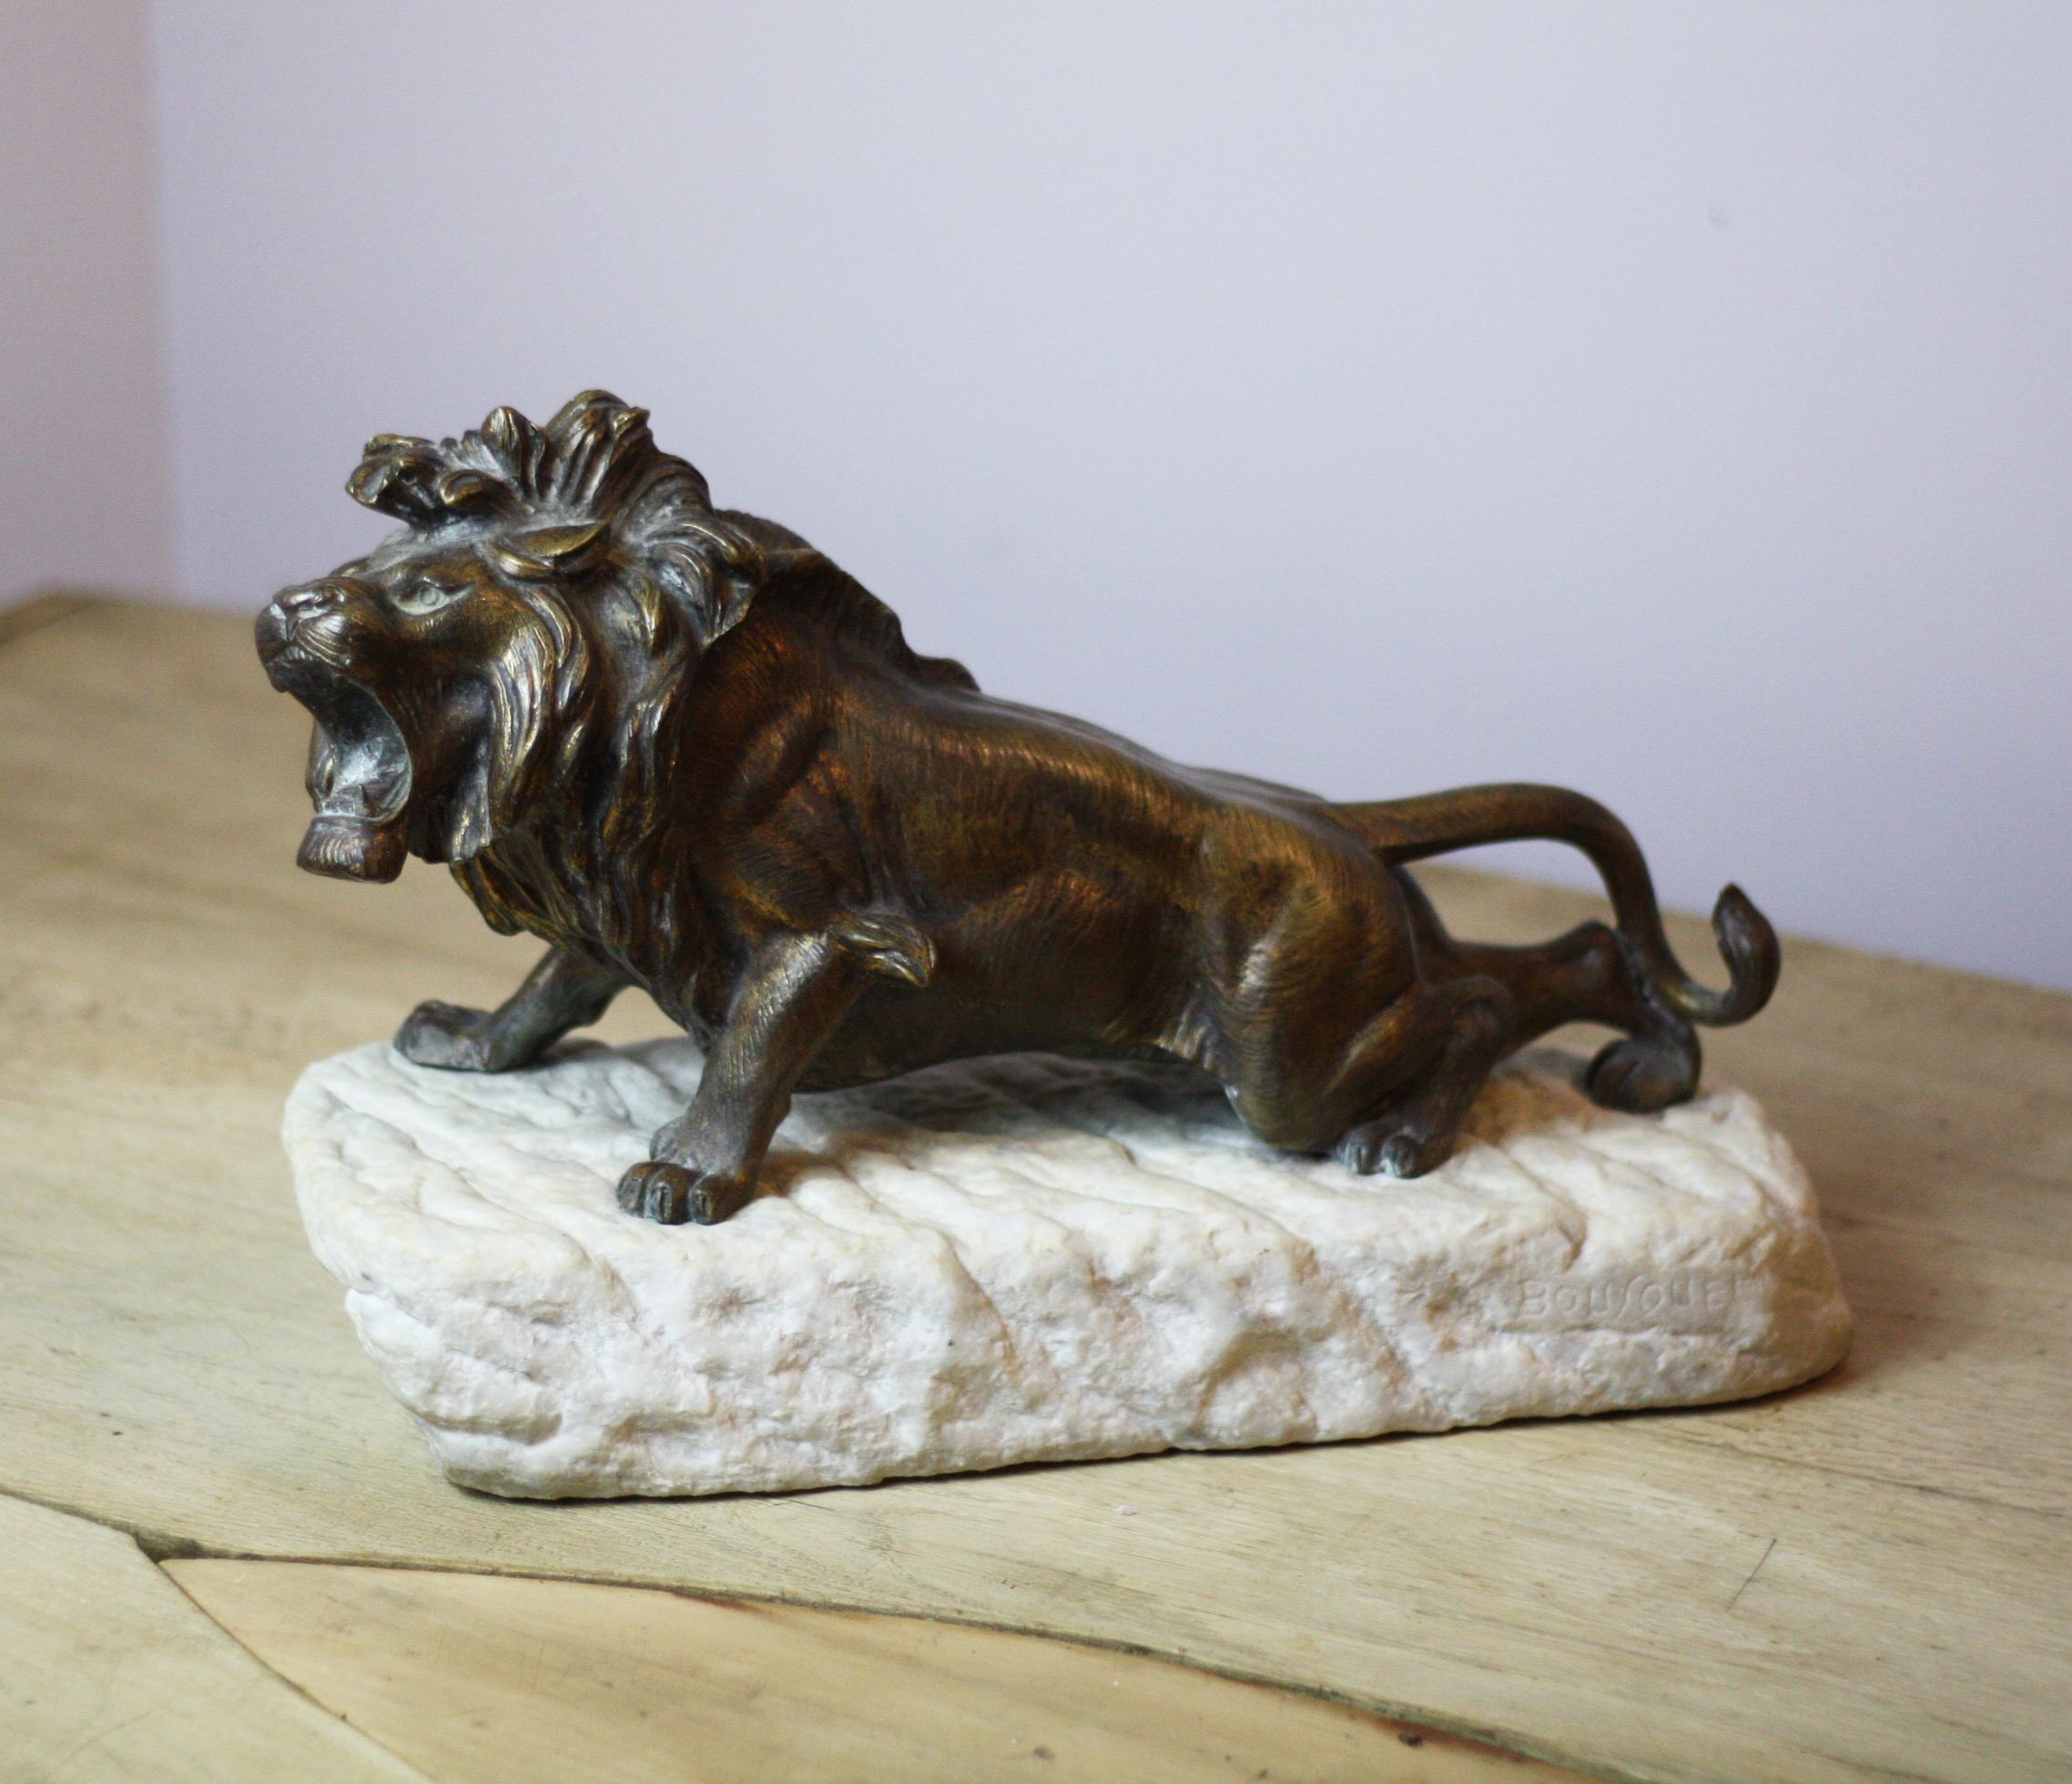 Handsome bronze lion on carved stone base by acclaimed French sculptor Robert Bousquet, 1894-1917.